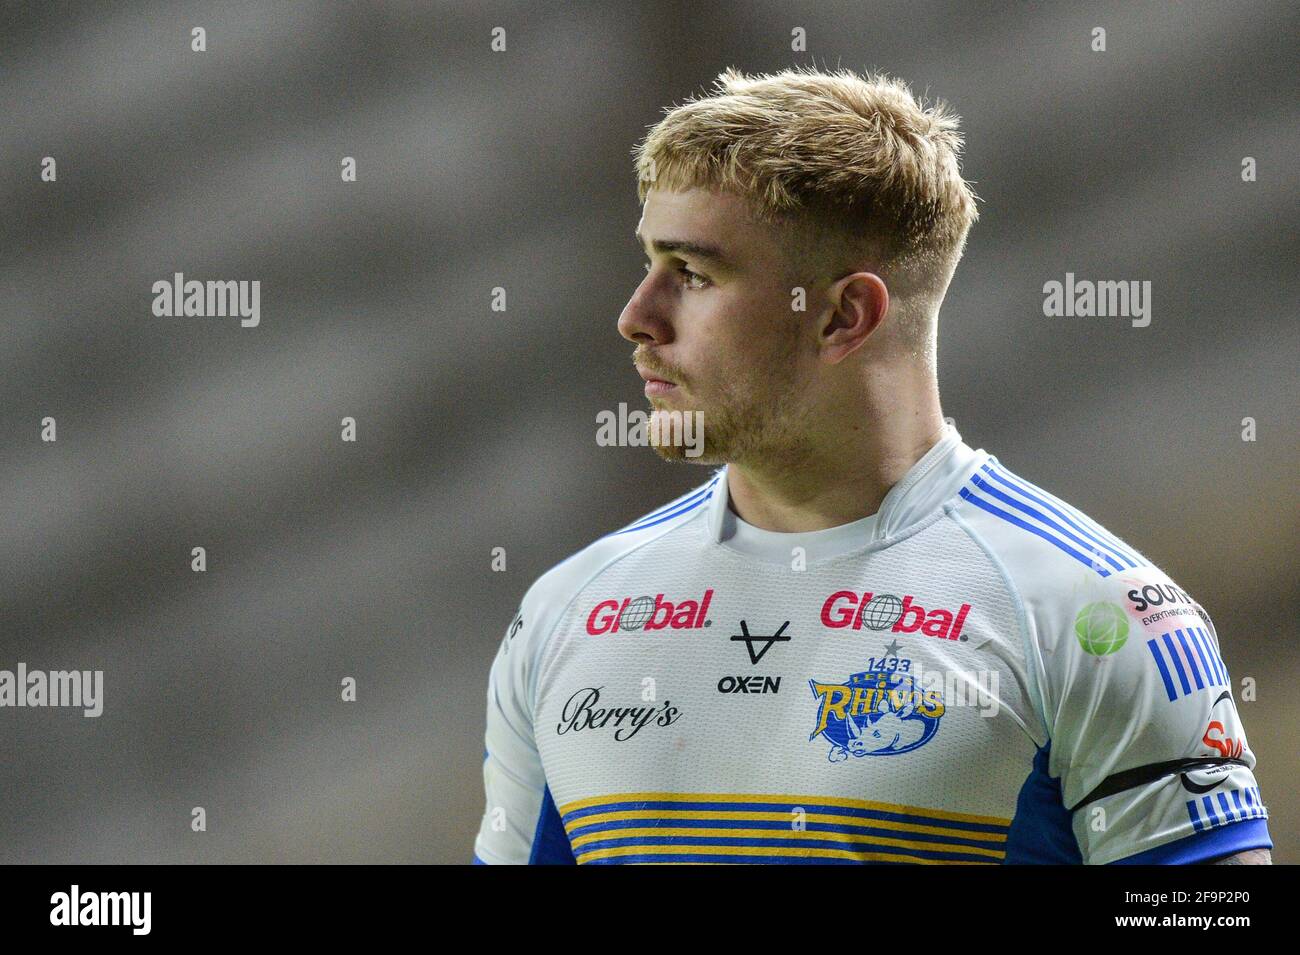 Leeds, England - 15th April 2021 - Liam Sutcliffe (15) of Leeds Rhinos during the Rugby League Betfred Super League Round 3 Leeds Rhinos vs Wigan Warriors at Emerald Headingley Stadium, Leeds, UK  Dean Williams/Alamy Live News Stock Photo